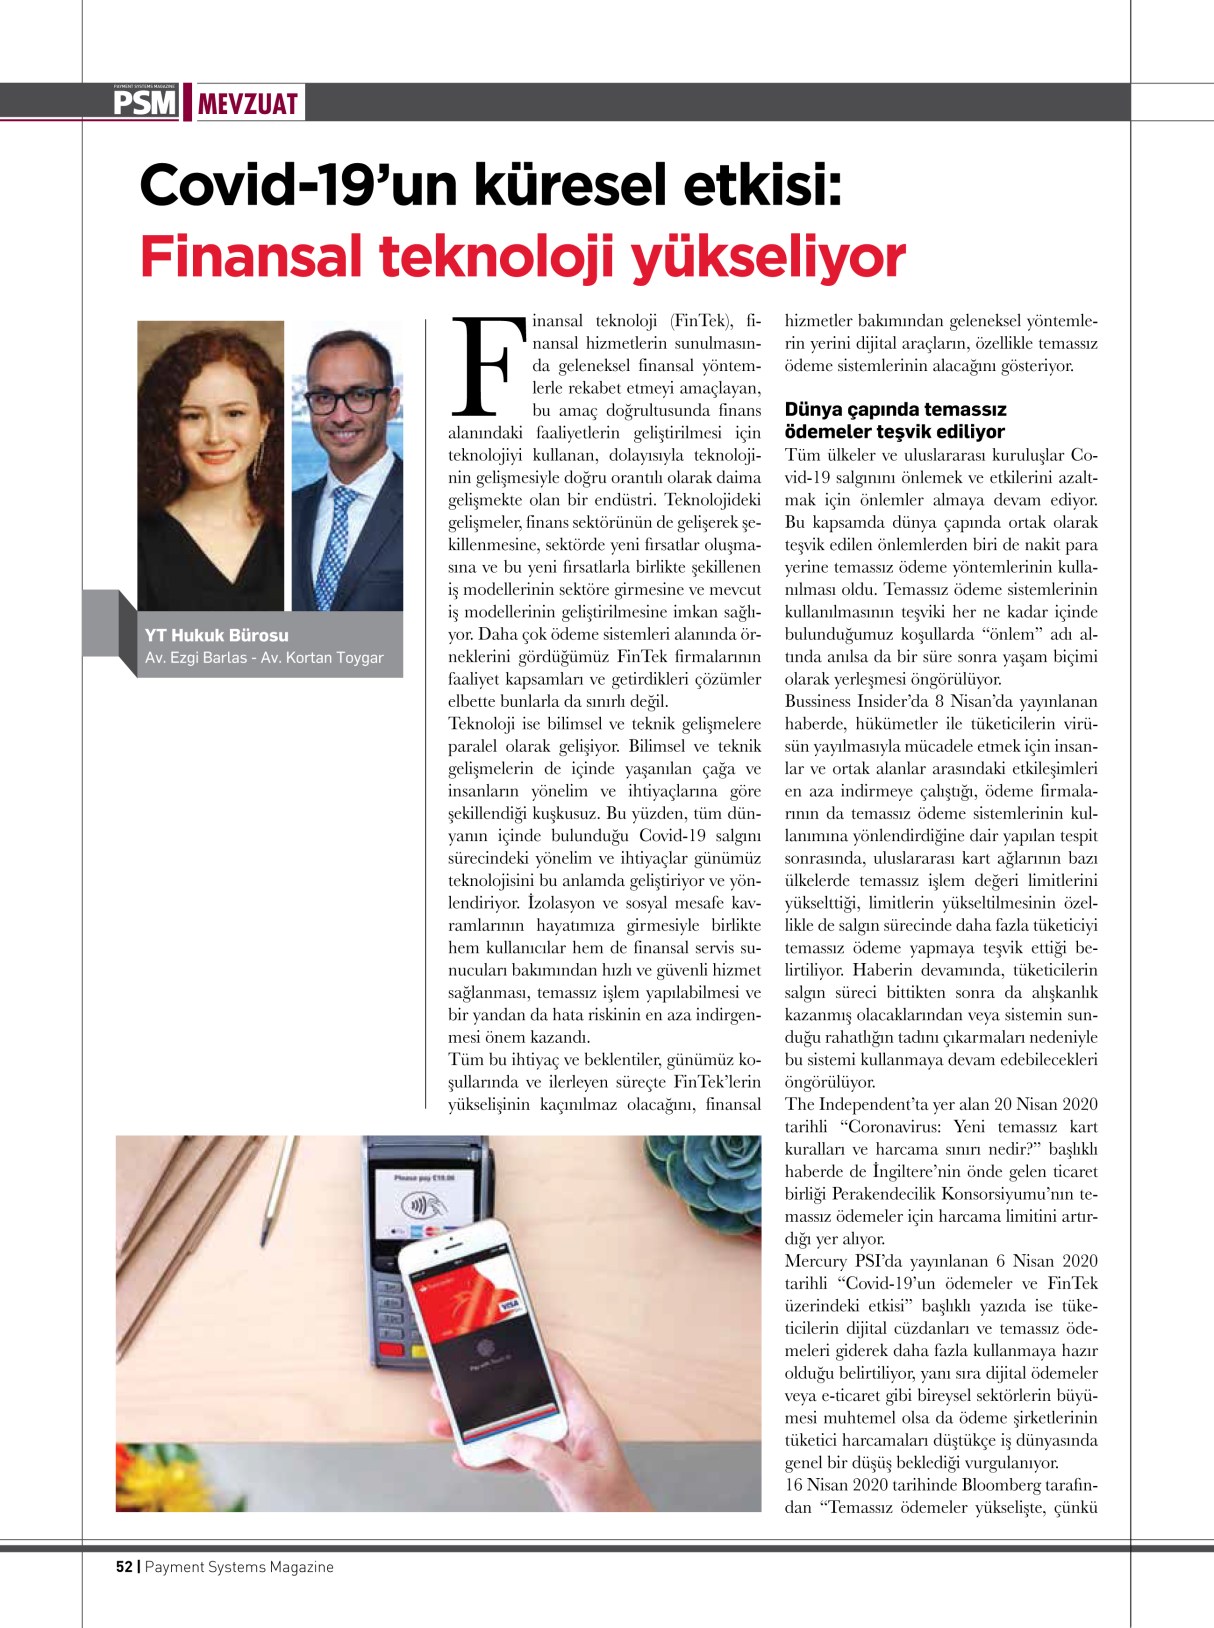 Payment Systems Magazine 1